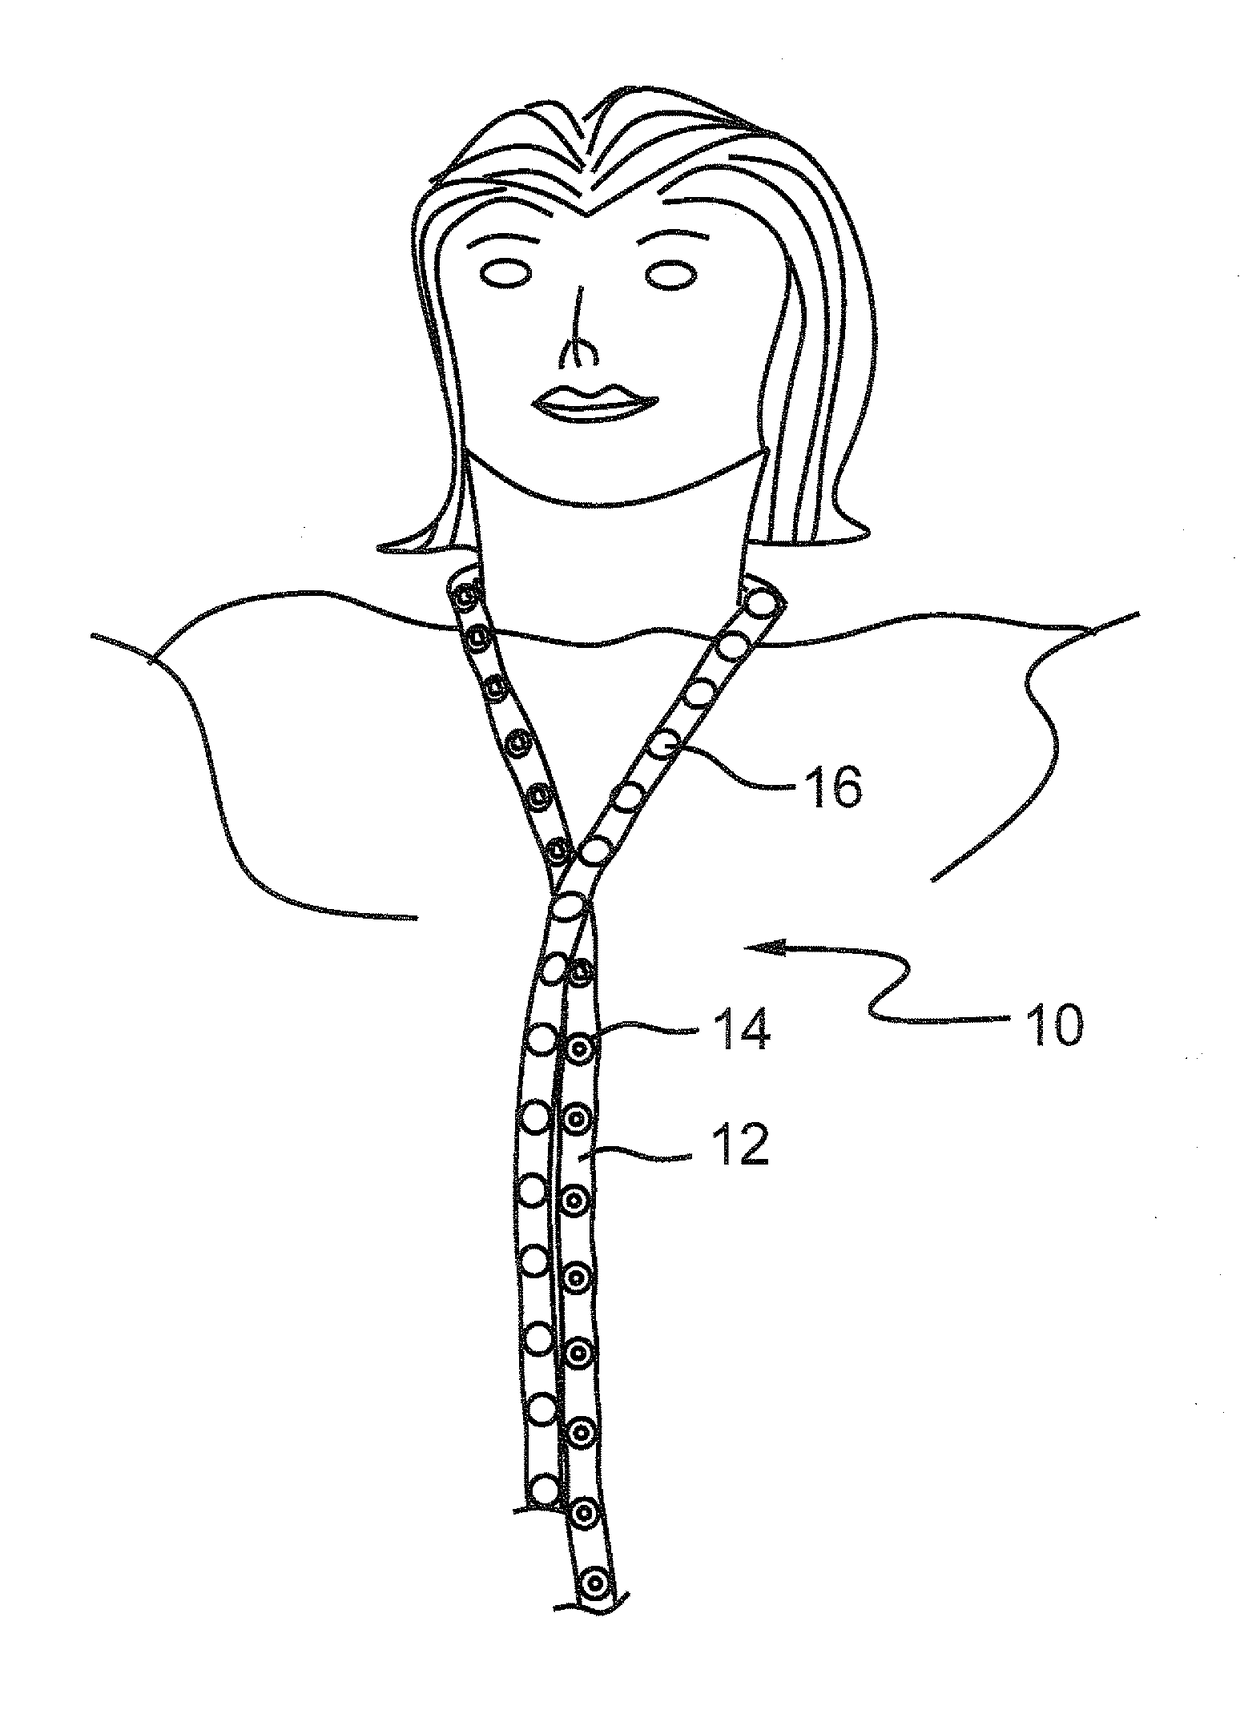 Multiple configuration string-like accessory